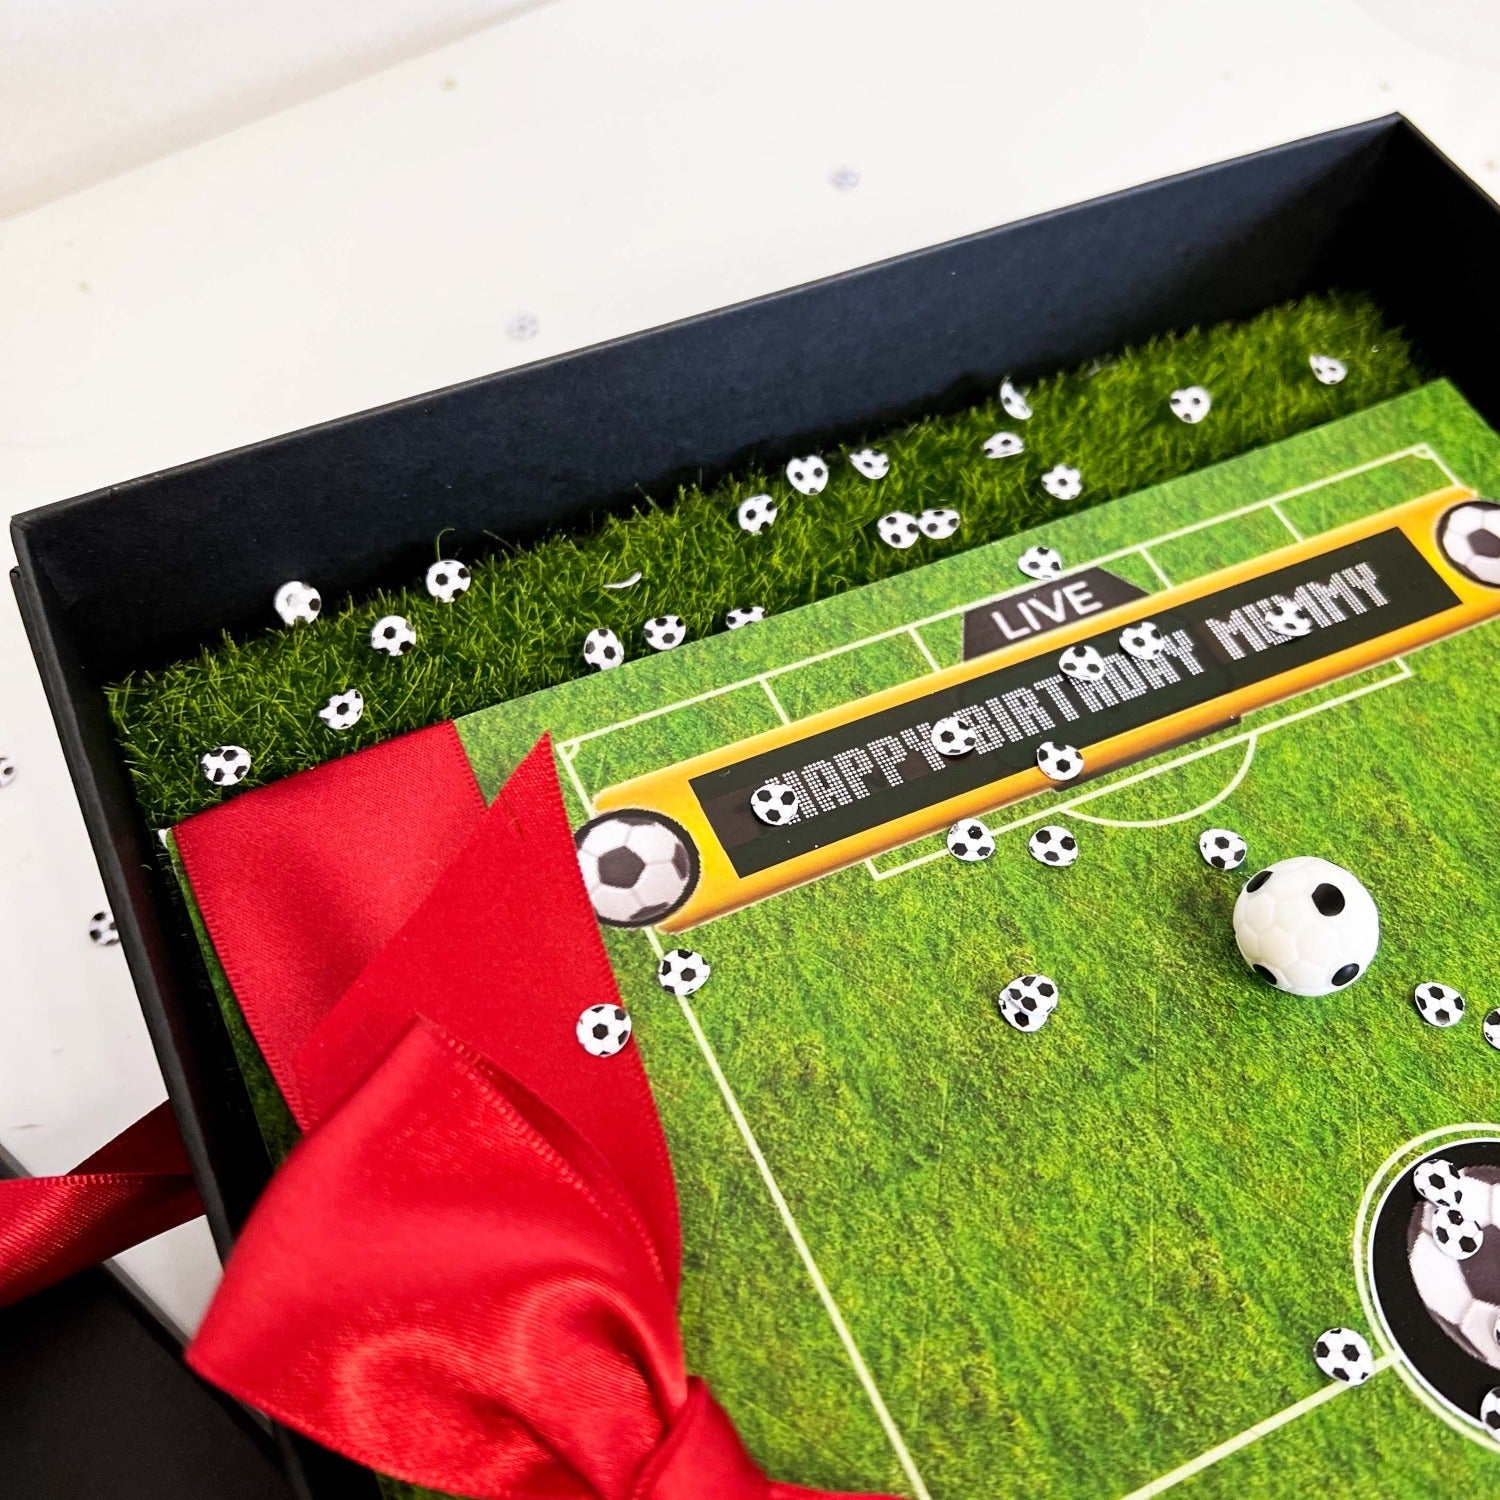 Football pitch birthday card for brother on astroturf grass scented with pitch the grassy fragrance